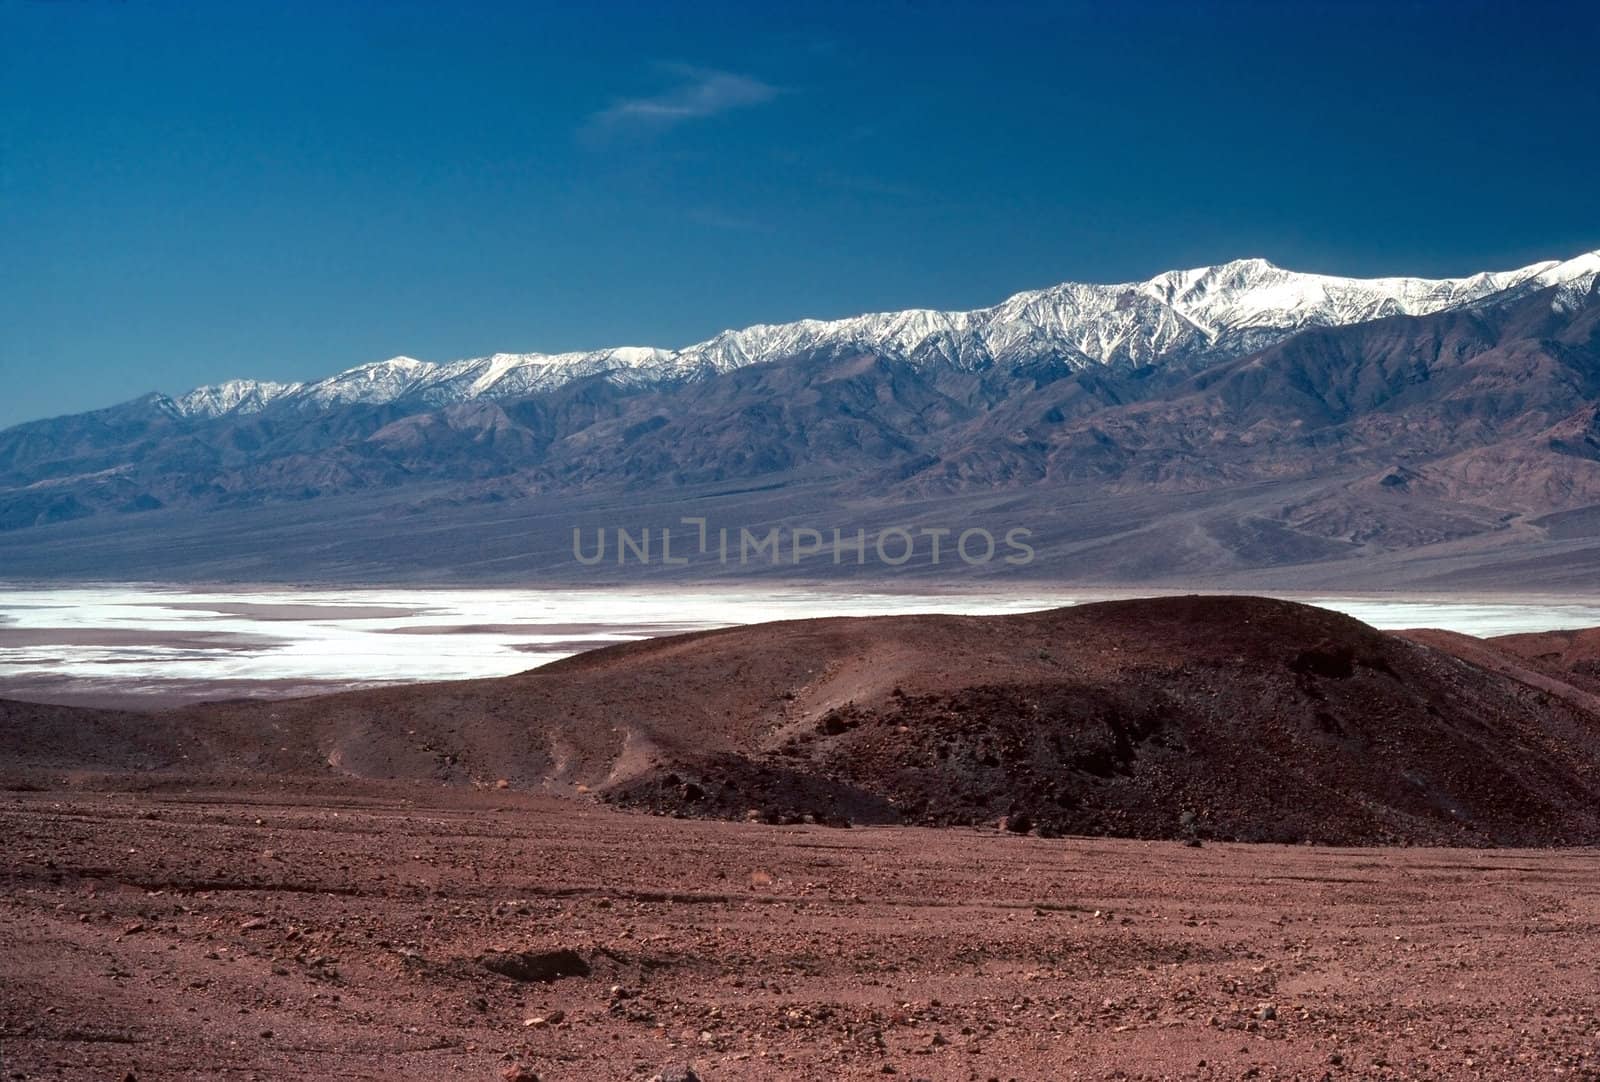 Panamint Mountain in Death Valley, California